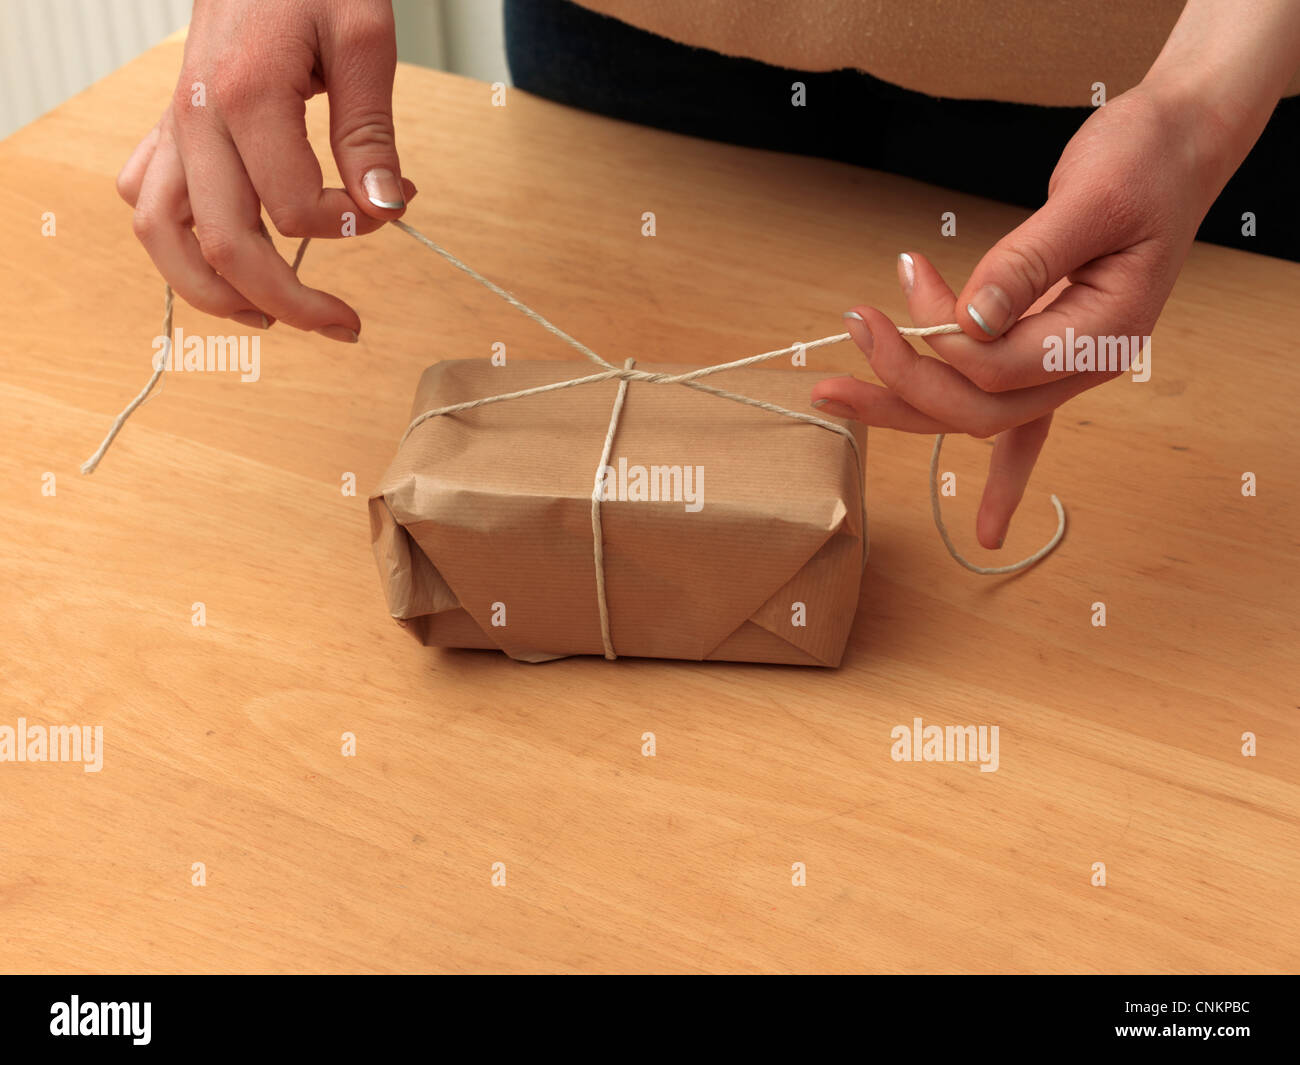 Tying Knot In String Around A Parcel Stock Photo - Alamy